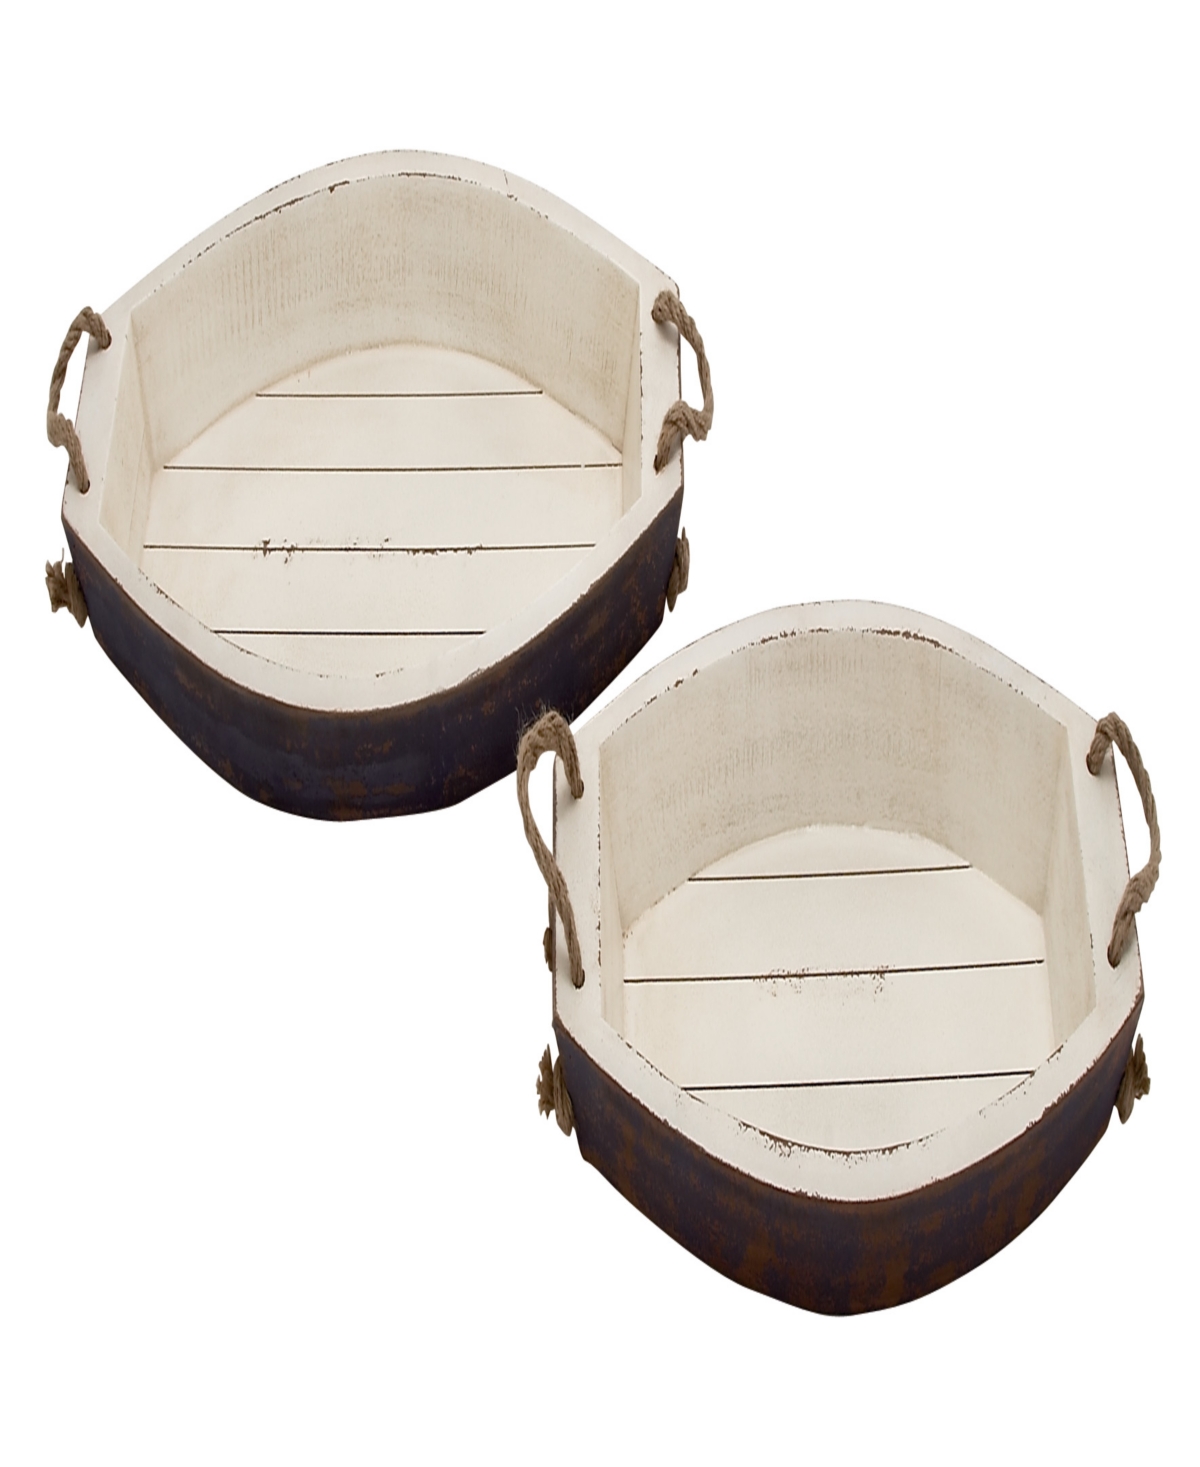 Rosemary Lane Wood Sail Boat Tray With Rope Handles, Set Of 2, 23", 19" W In White